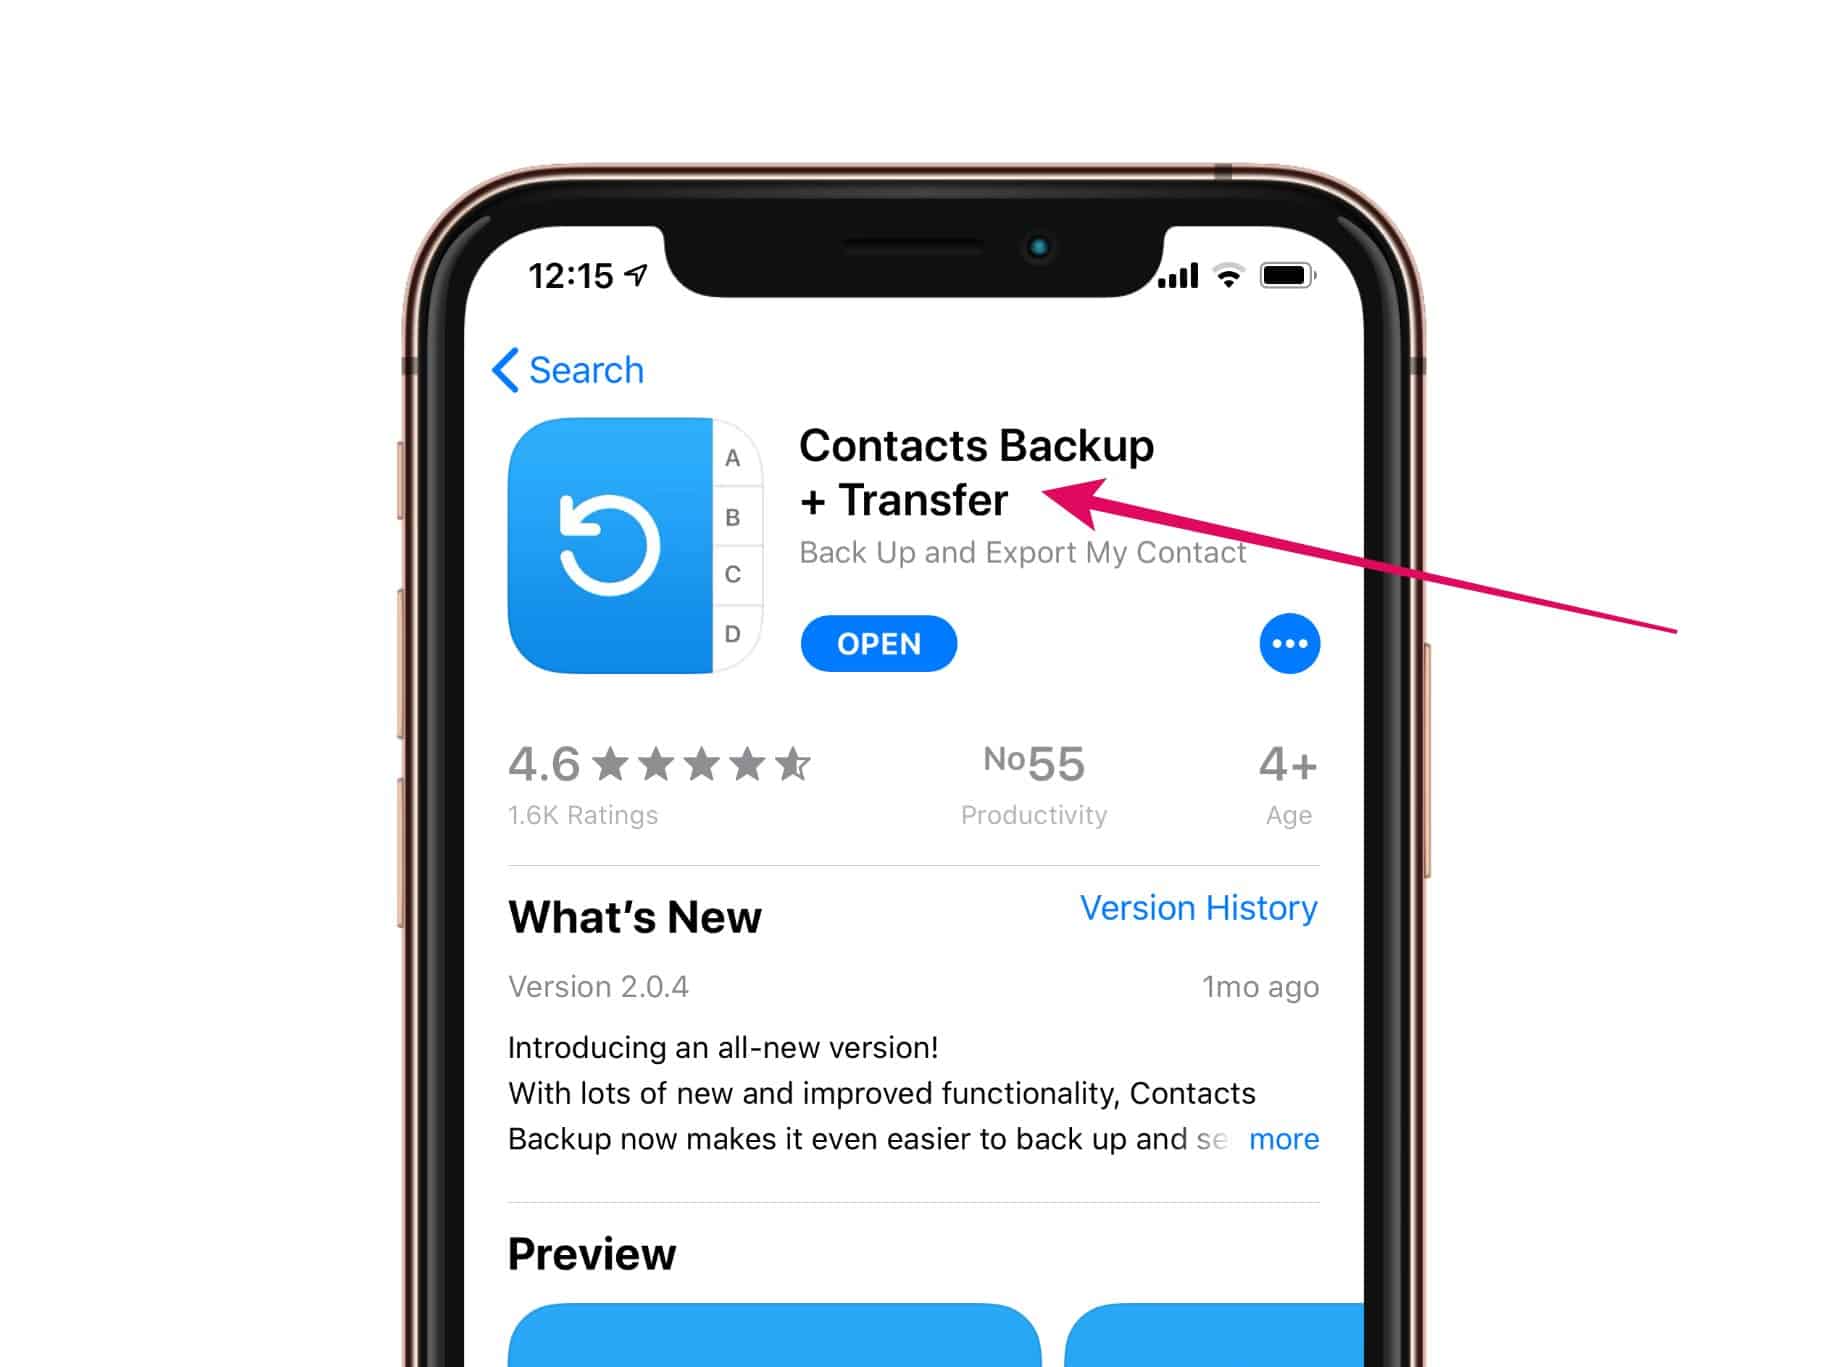 Contacts Backup + Transfer app